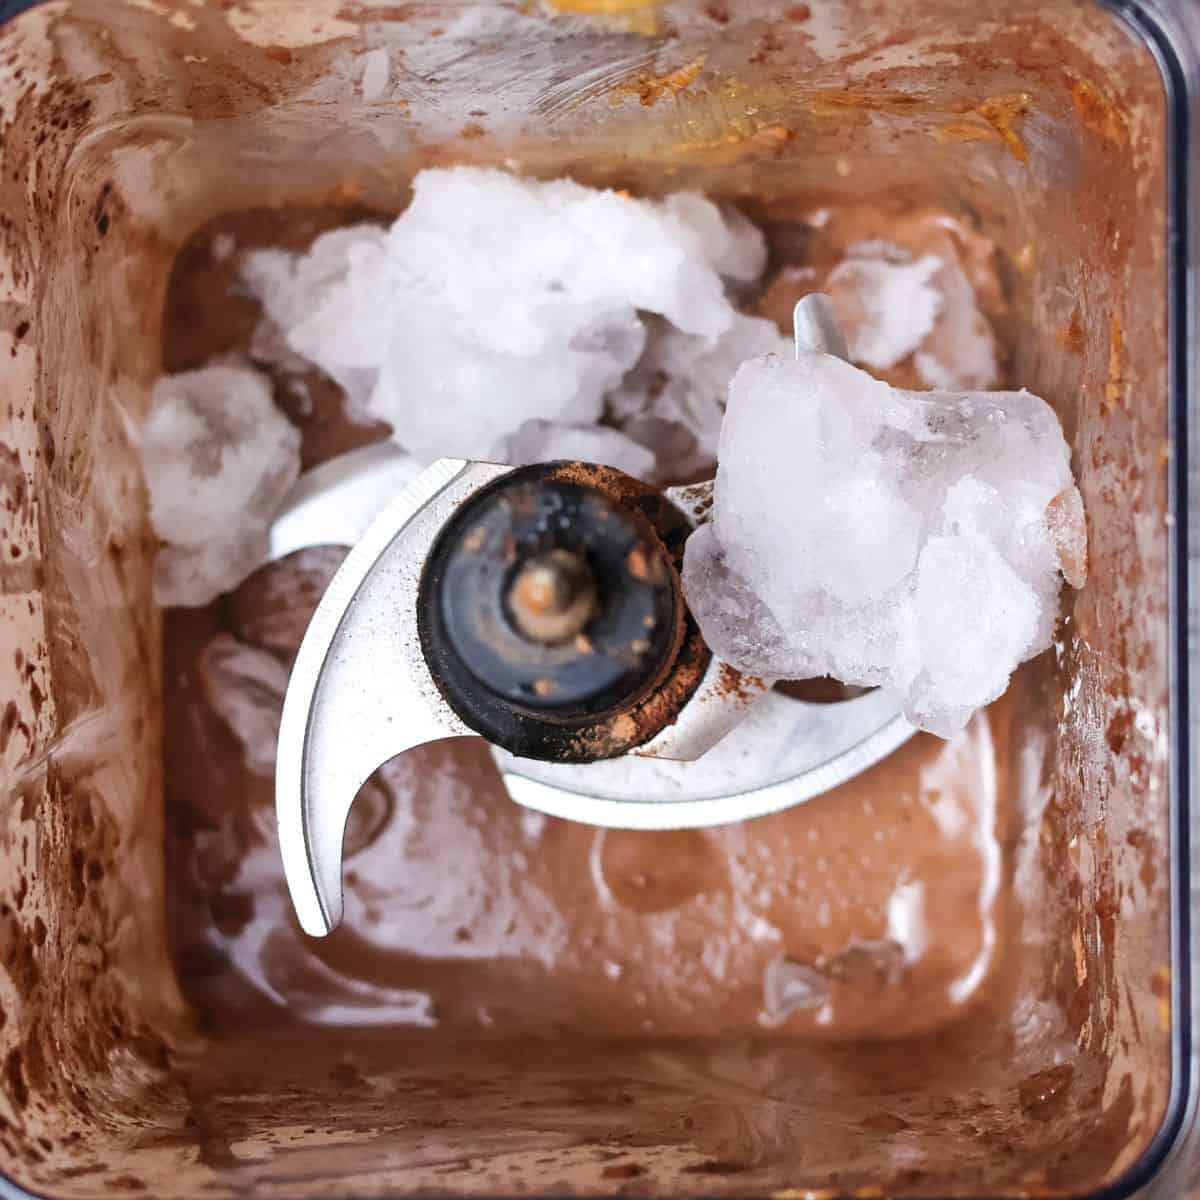 A blender filled with ice cubes on top of chocolate smoothie. The chocolate is swirled throughout the ice, and there is a dark layer of chocolate at the bottom of the jar. It is ready to blend again to thicken the smoothie further.